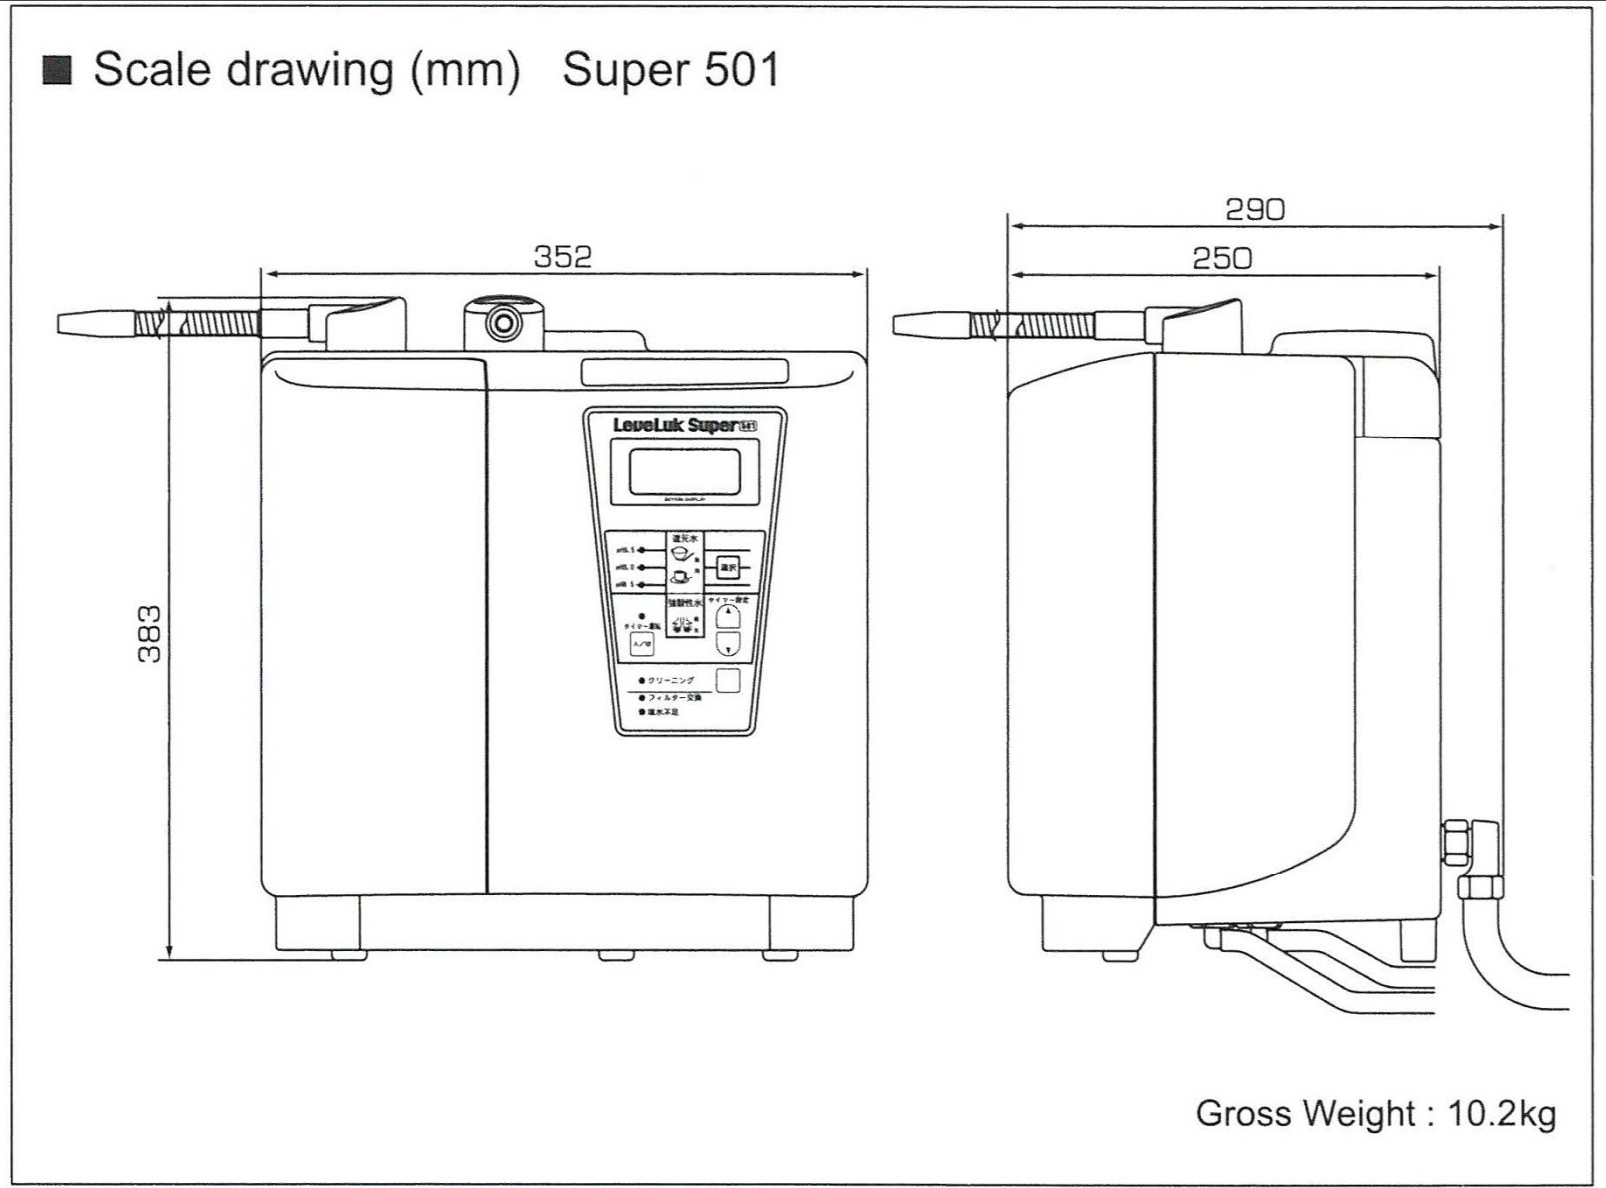 LeveLuk Super 501 Scale Drawing